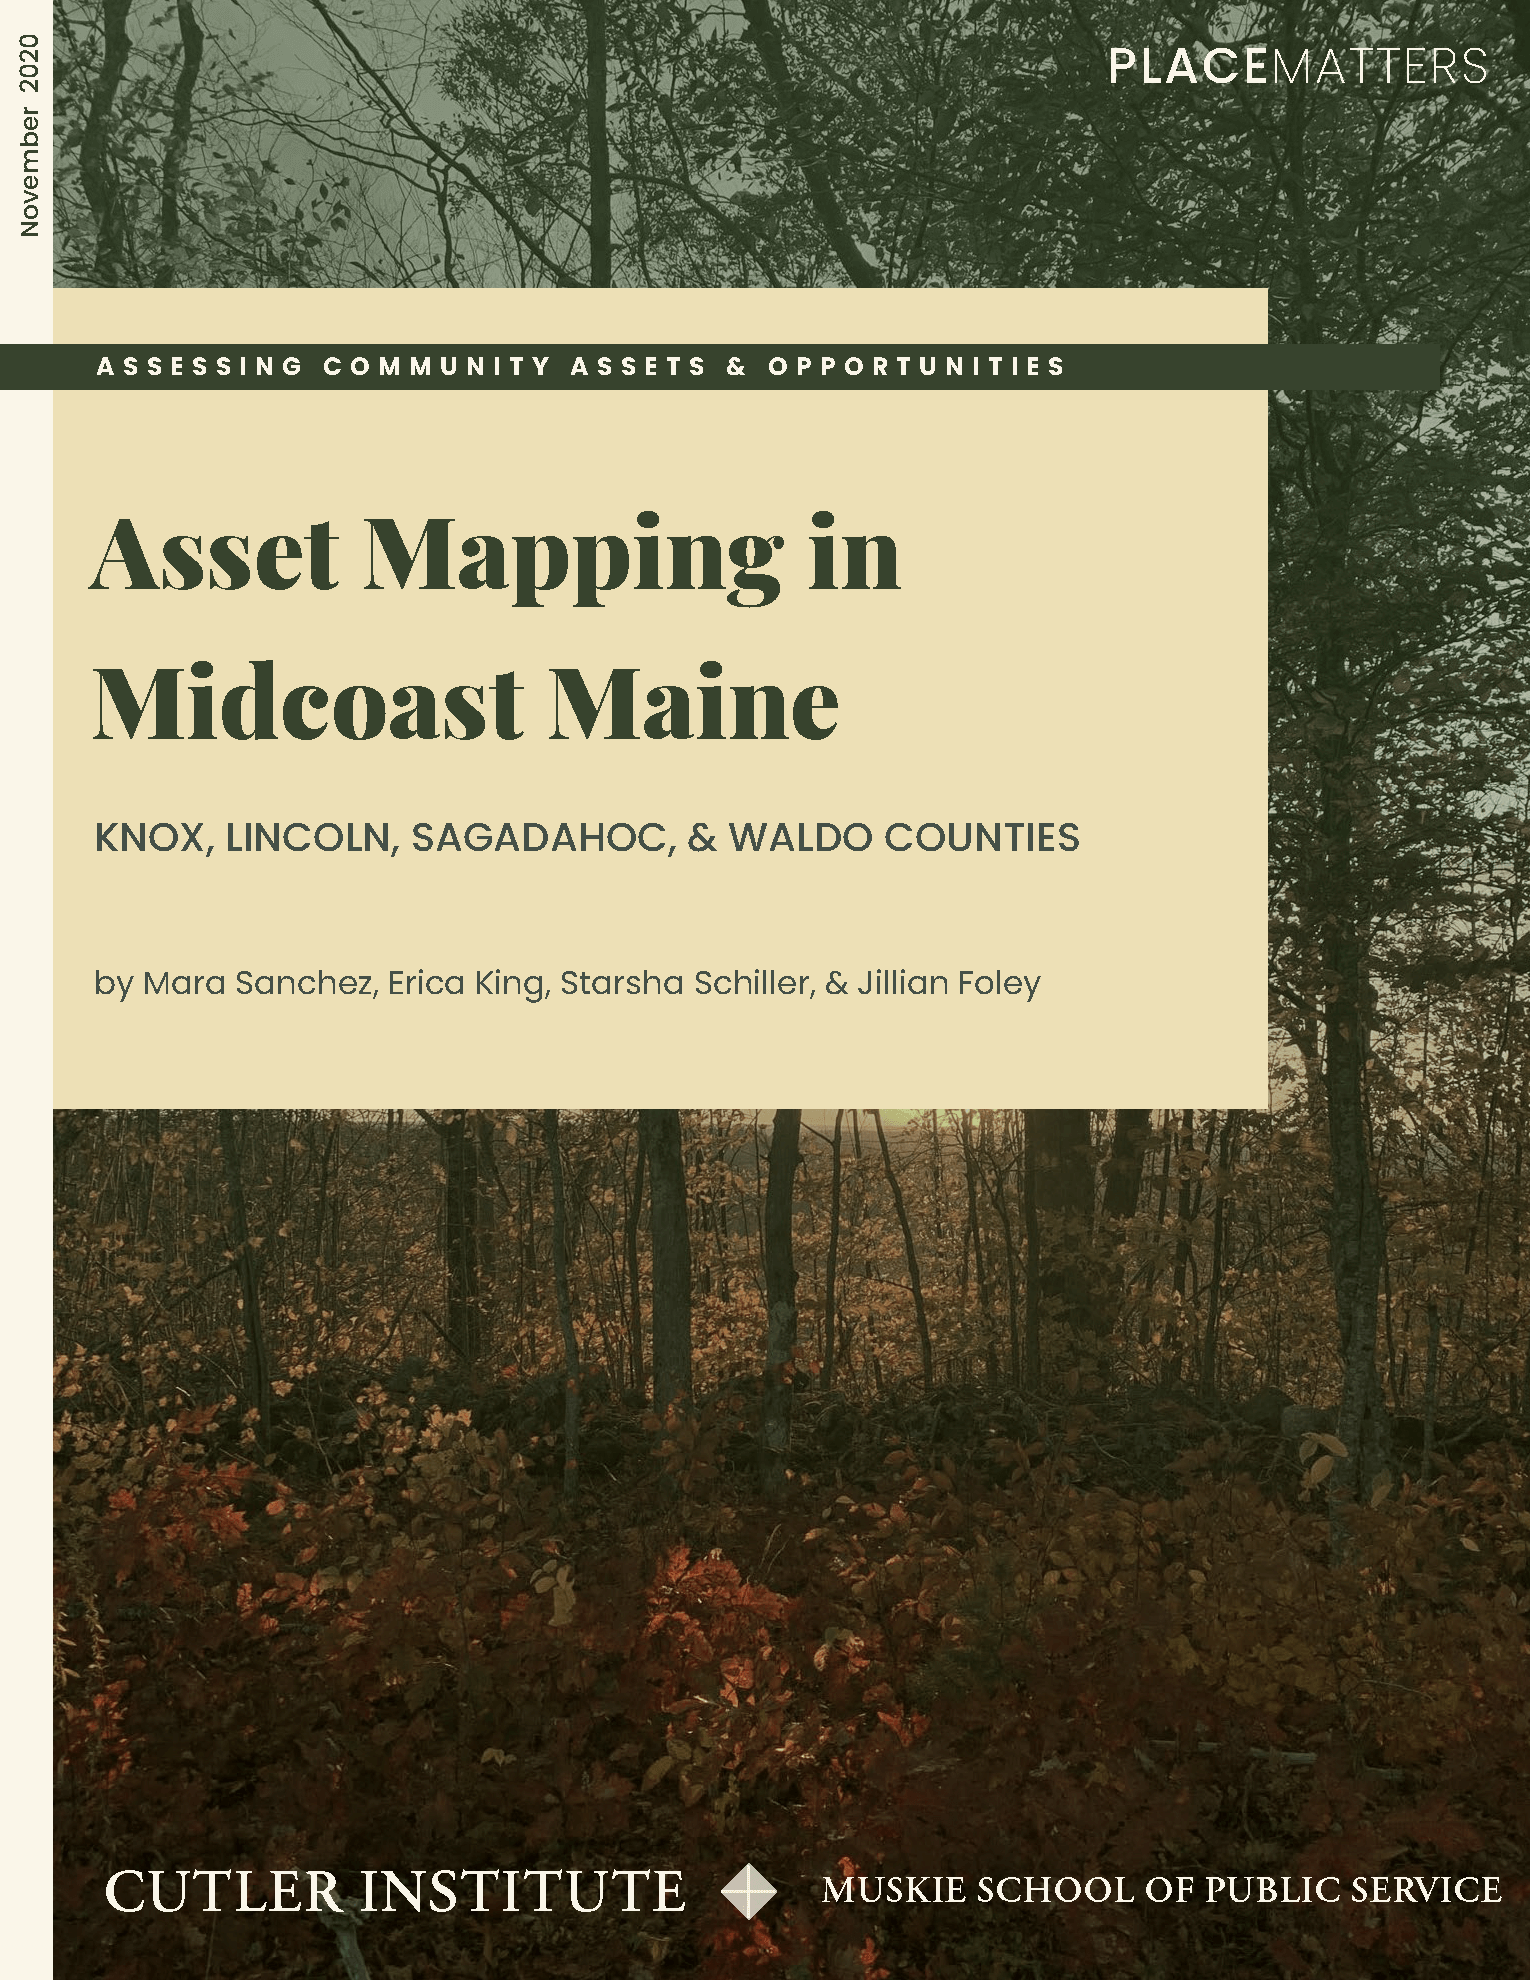 Asset Mapping in Midcoast Maine report cover